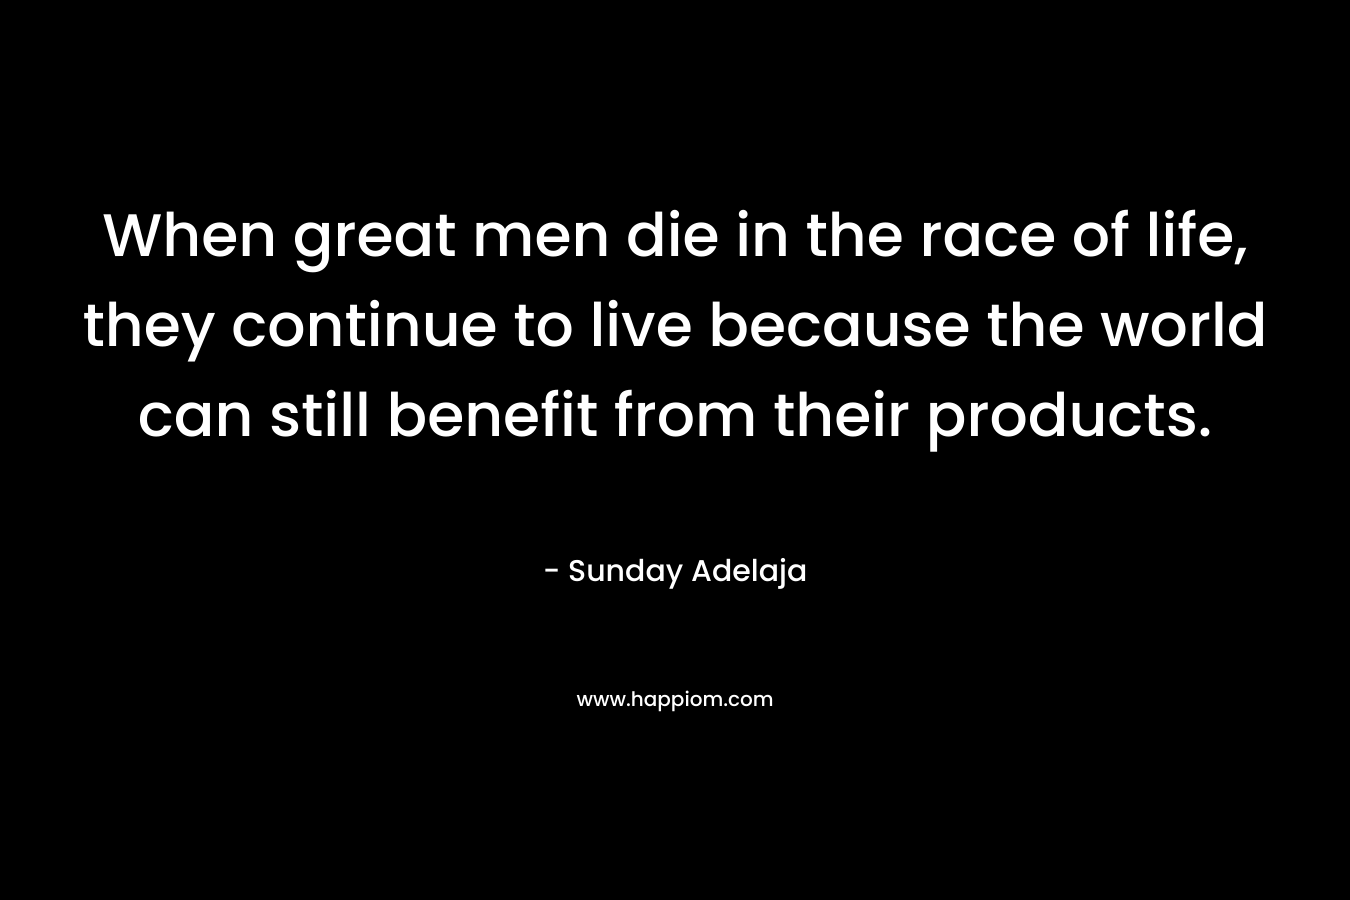 When great men die in the race of life, they continue to live because the world can still benefit from their products.